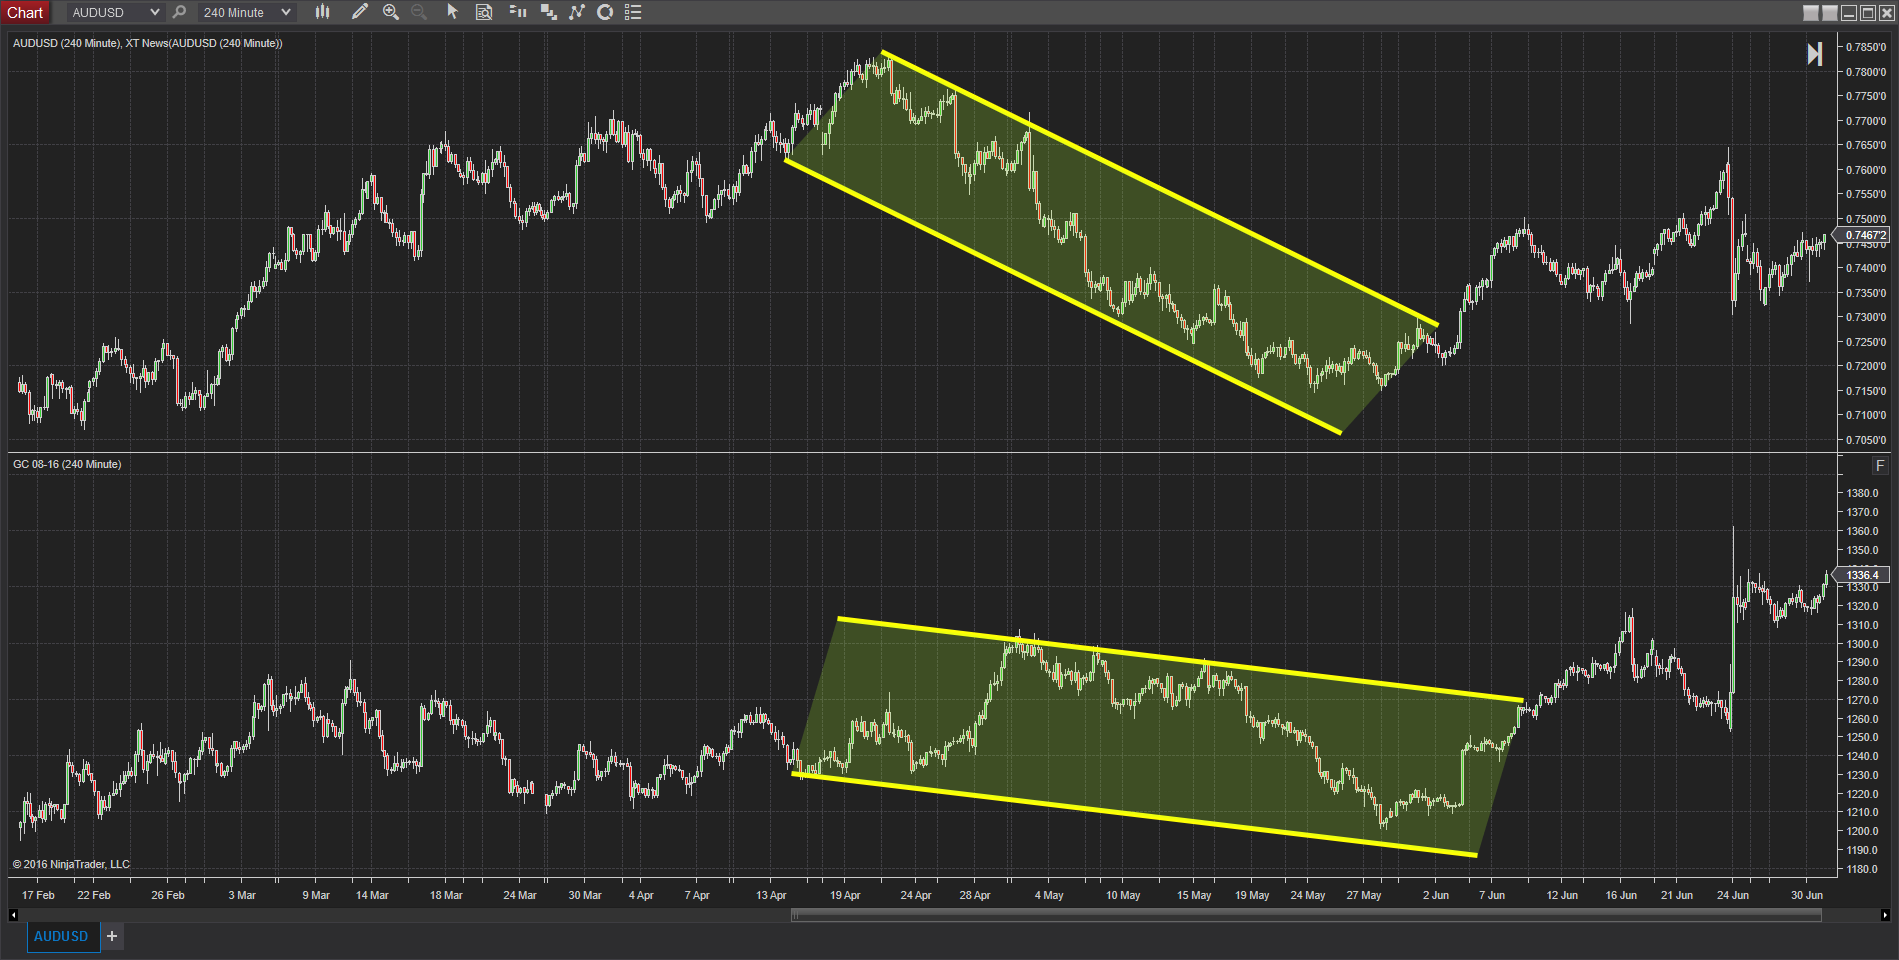 correlation between aud and gold